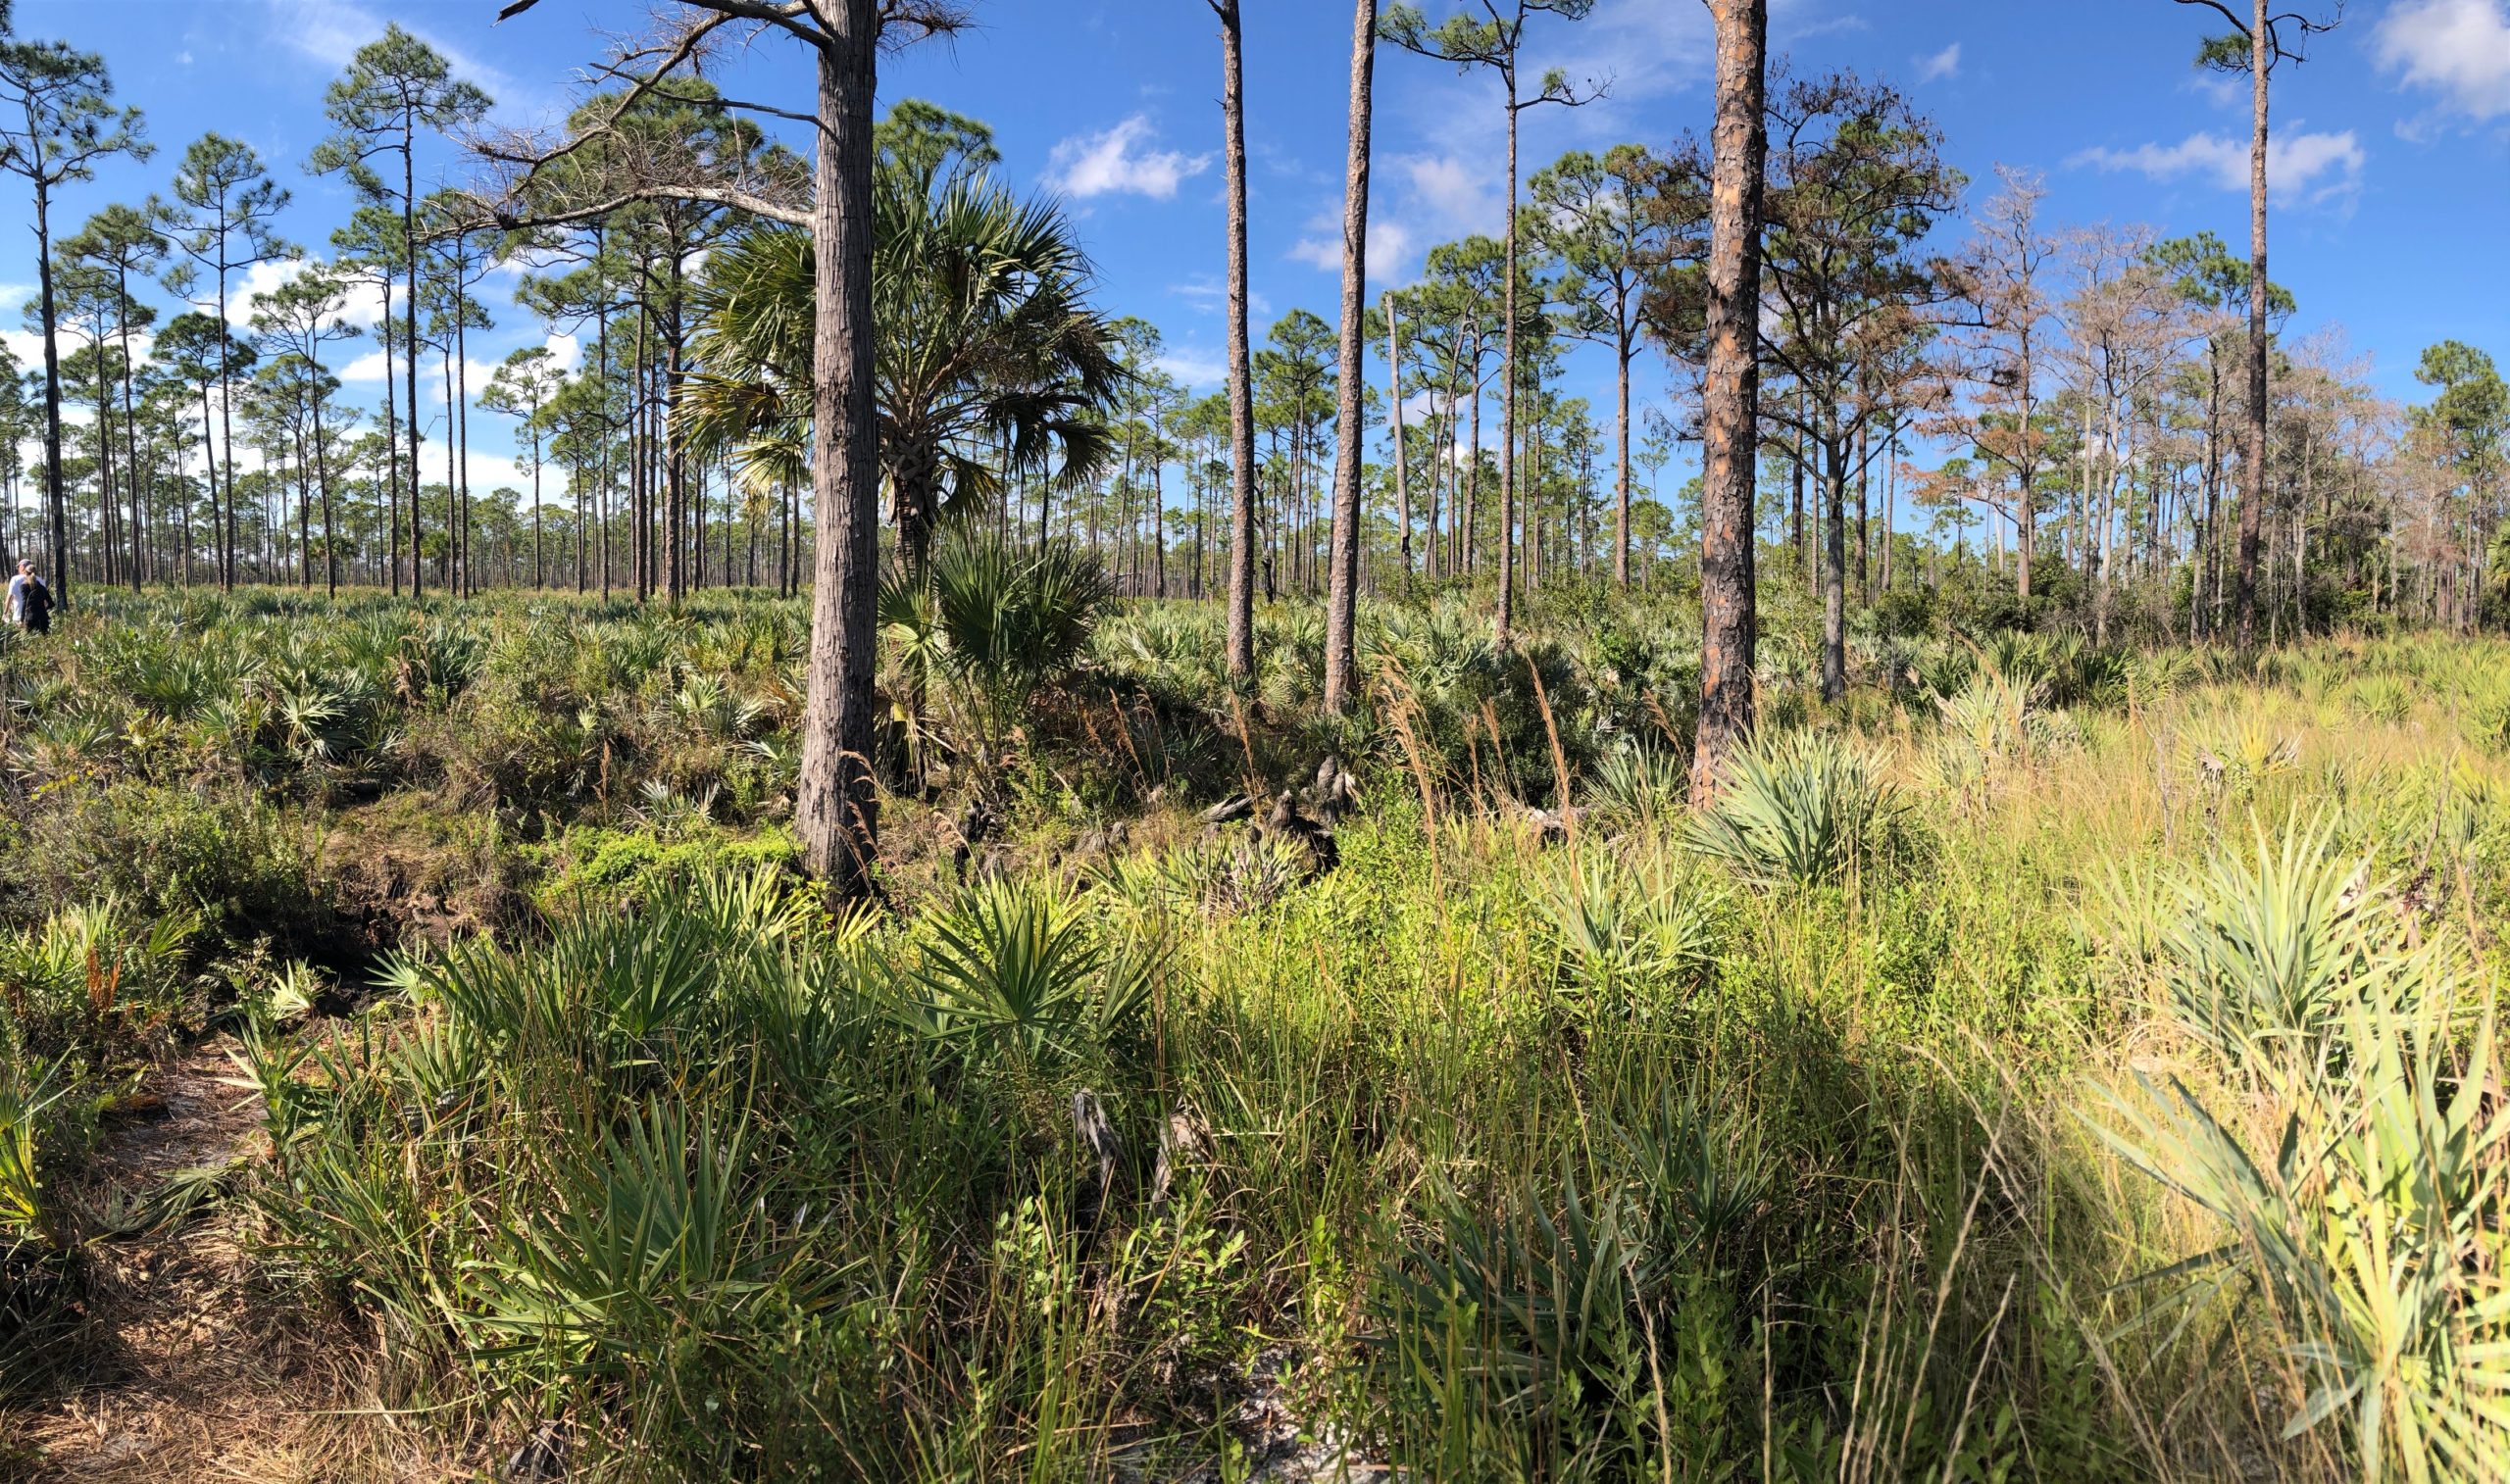 Hiking in Jonathan Dickinson State Park